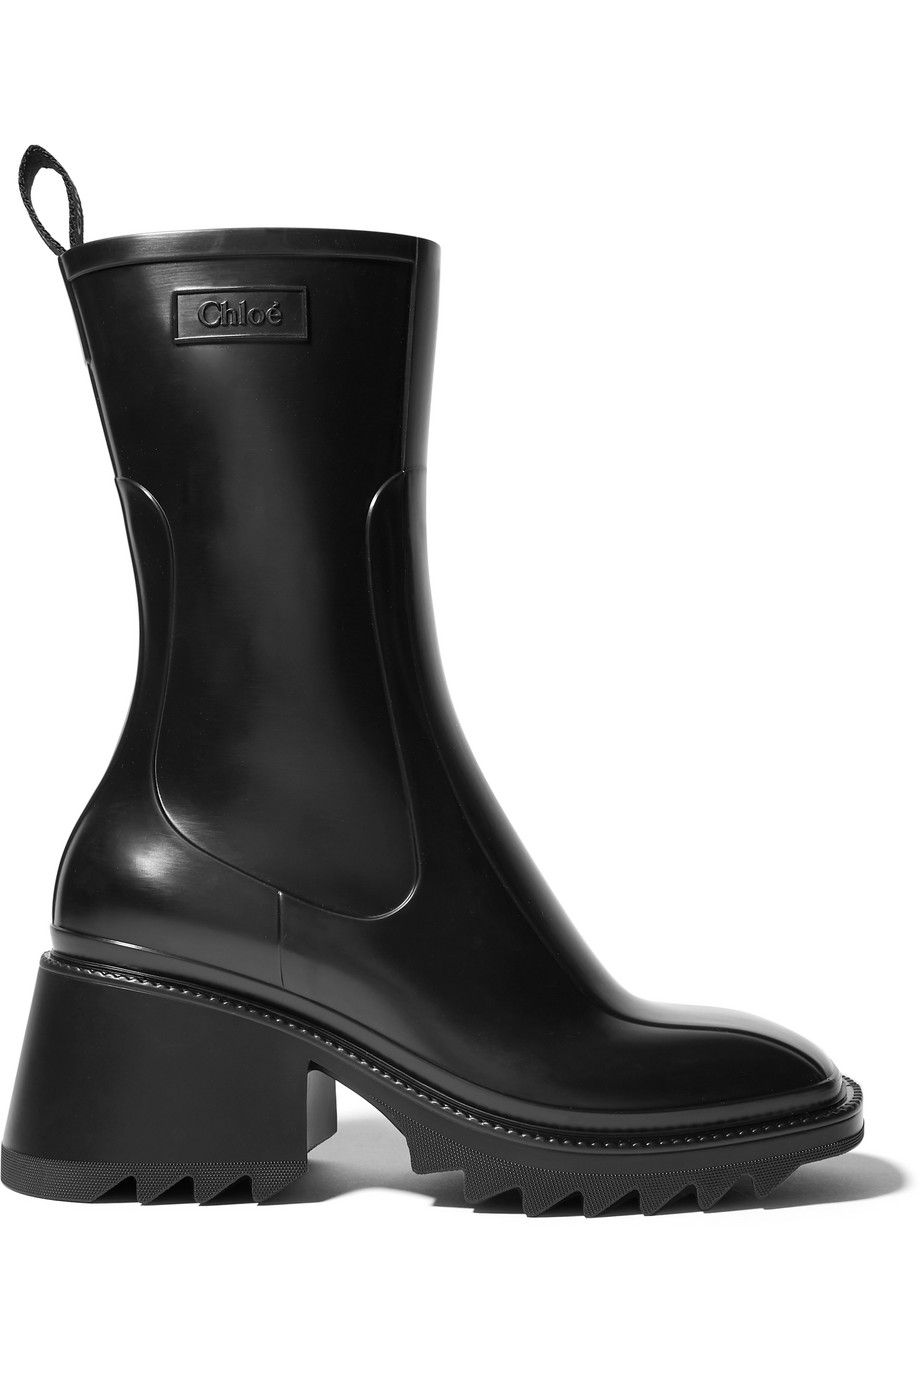 best boots for rain